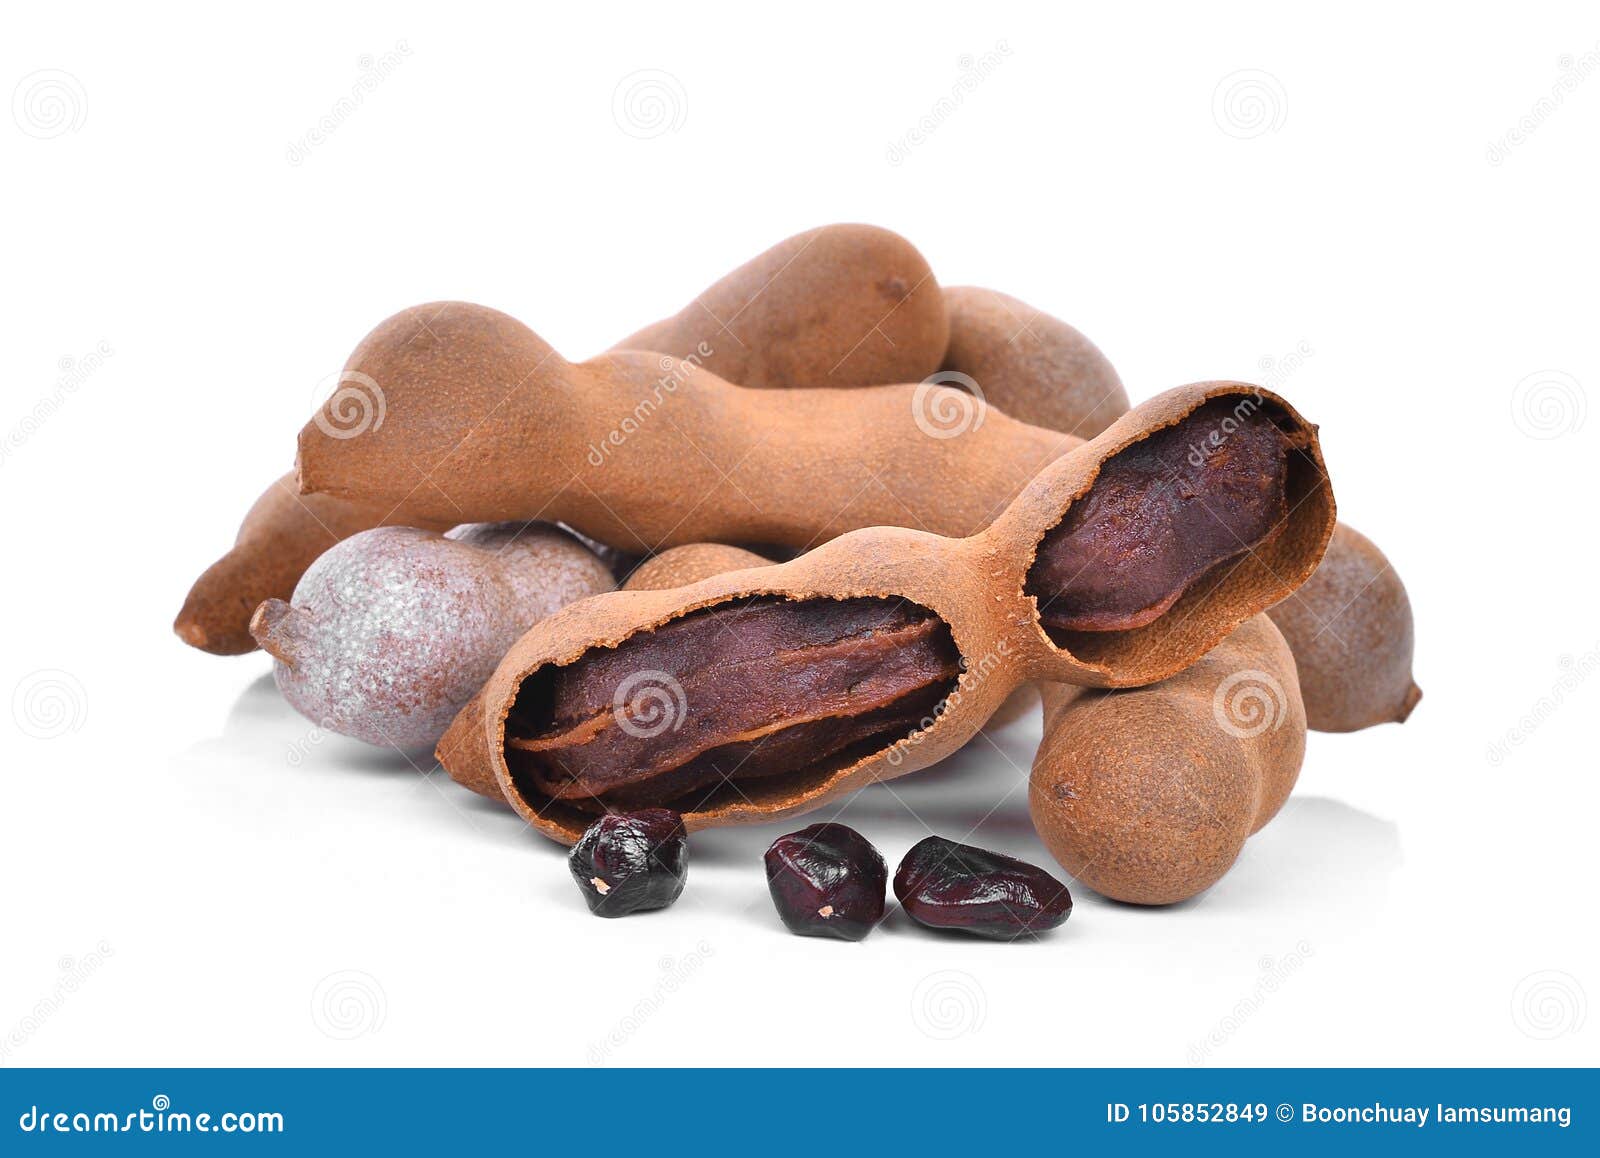 450 Tamarind Seeds Tropical Fruit White Photos Free Royalty Free Stock Photos From Dreamstime